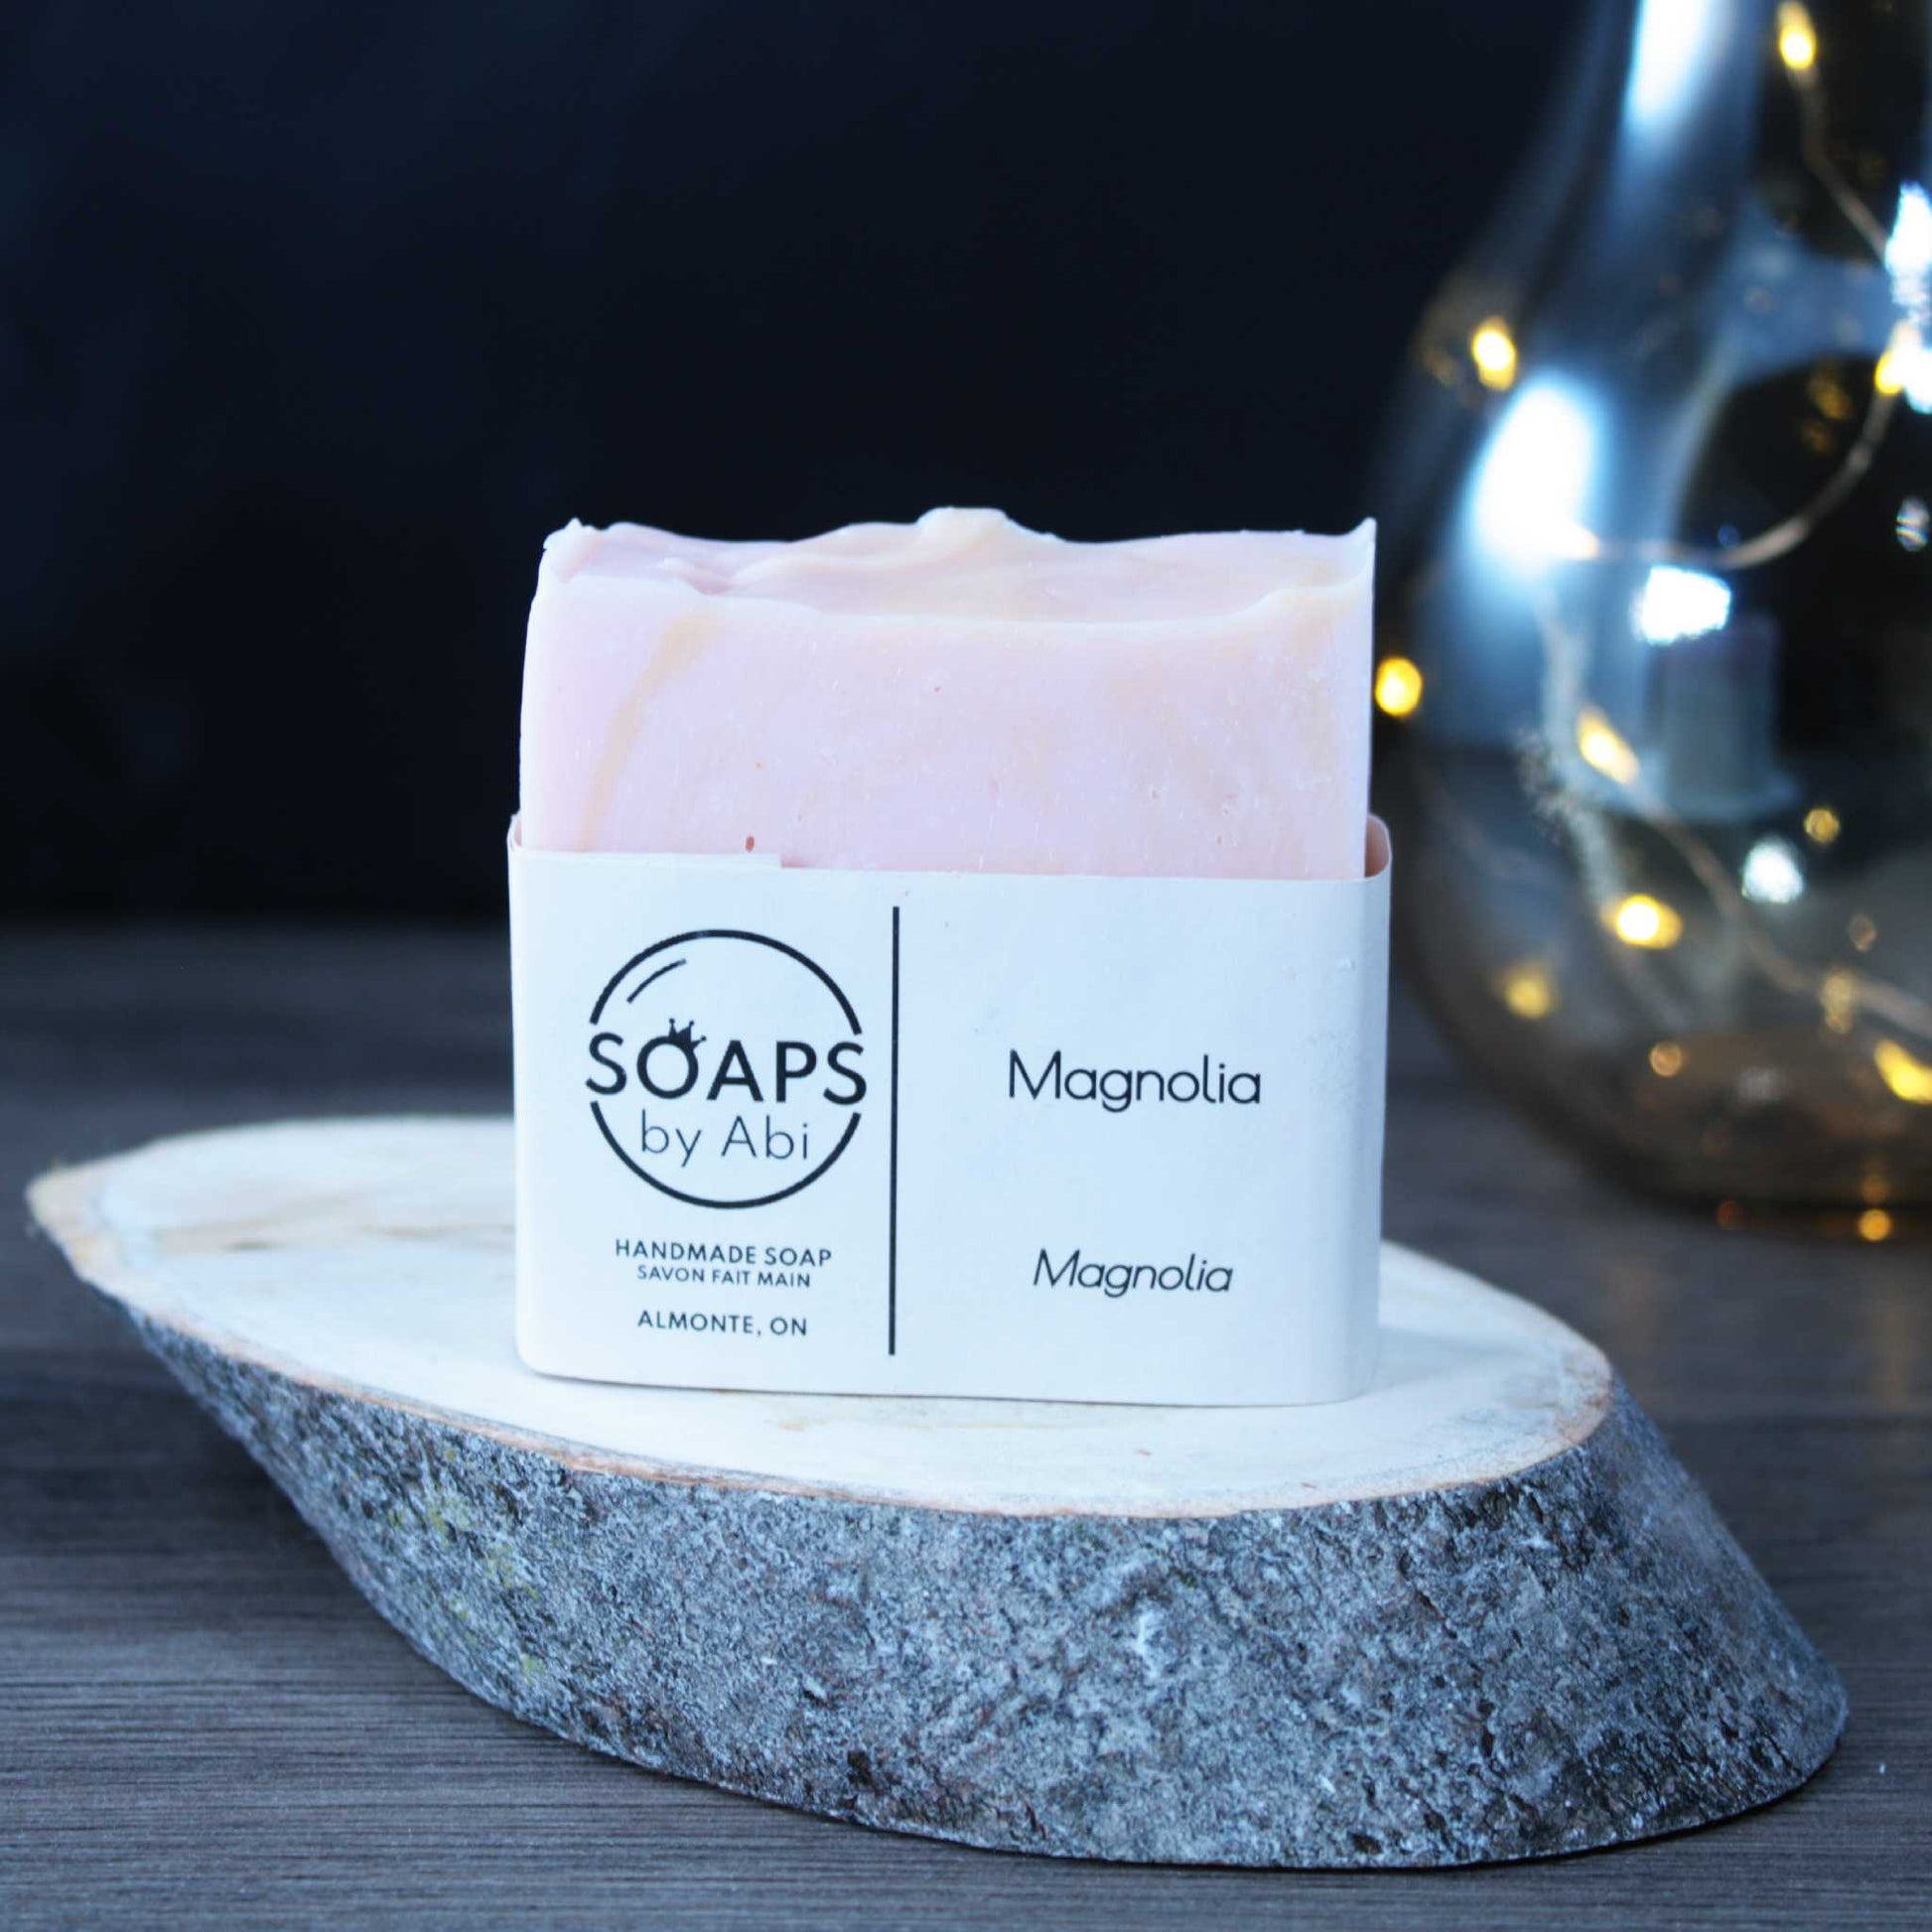 Magnolia soap Soaps by Abi homemade in almonte ontario